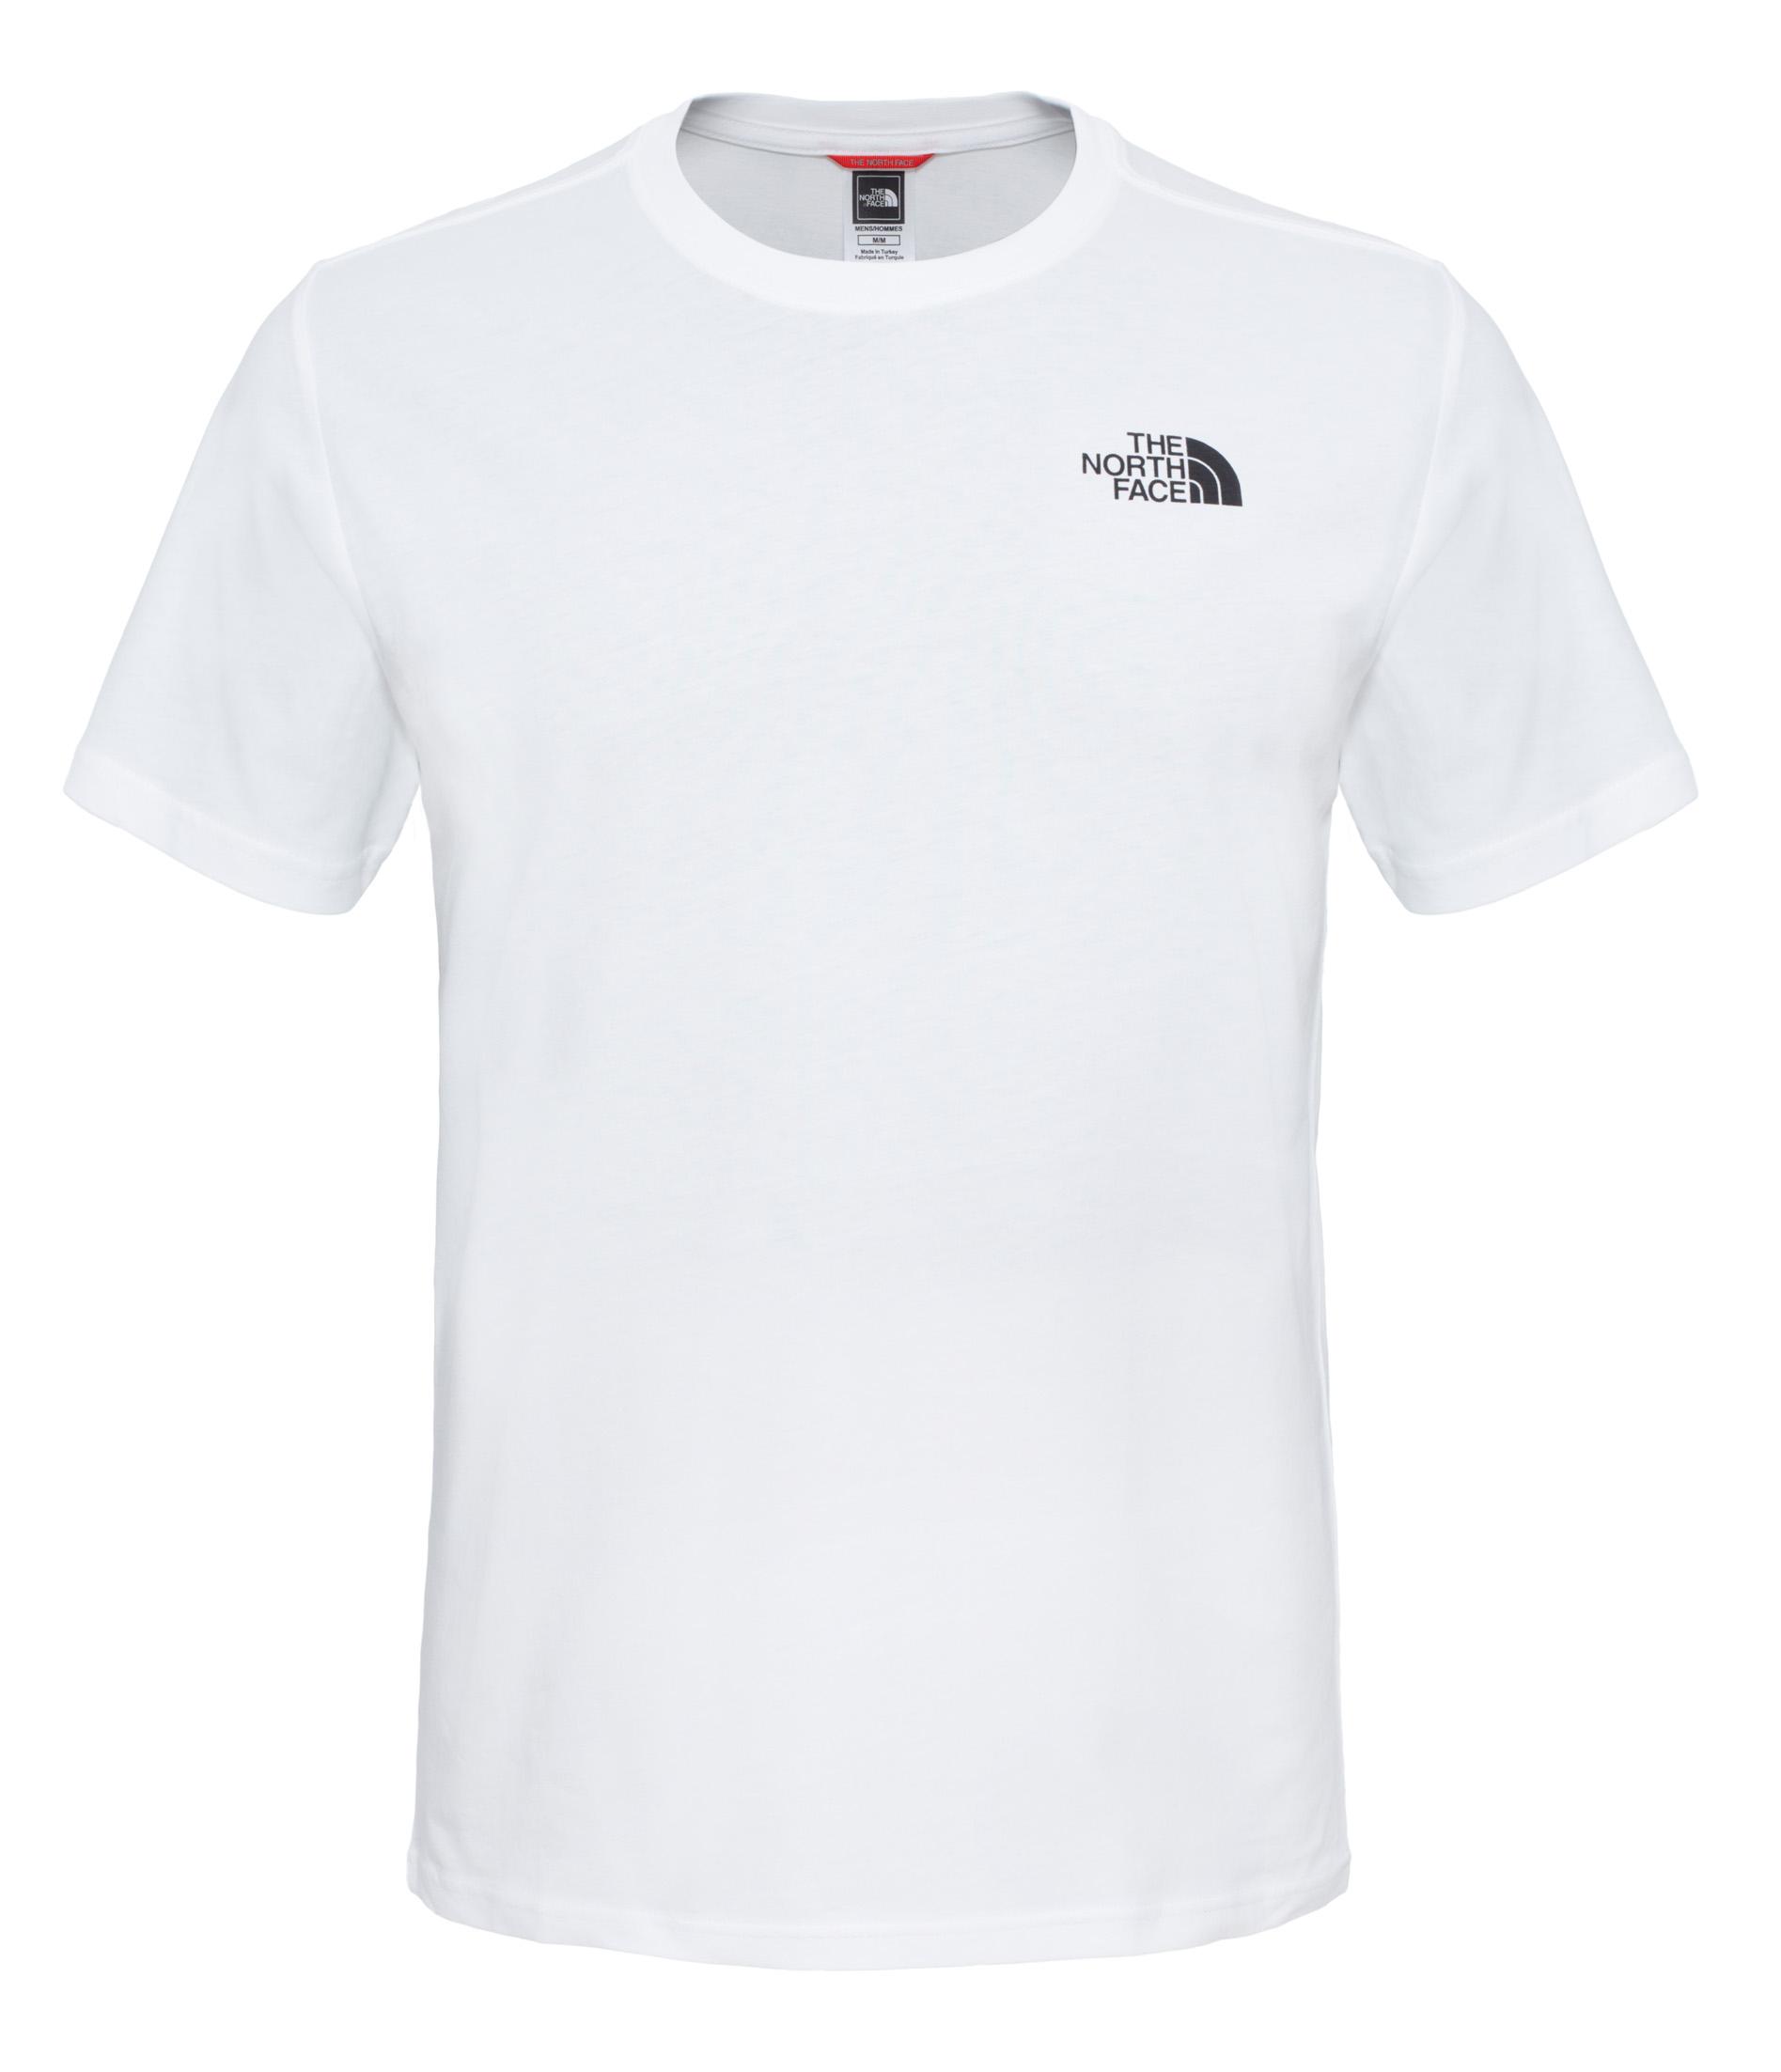 The North Face Simple Dome Tee - Tnf White